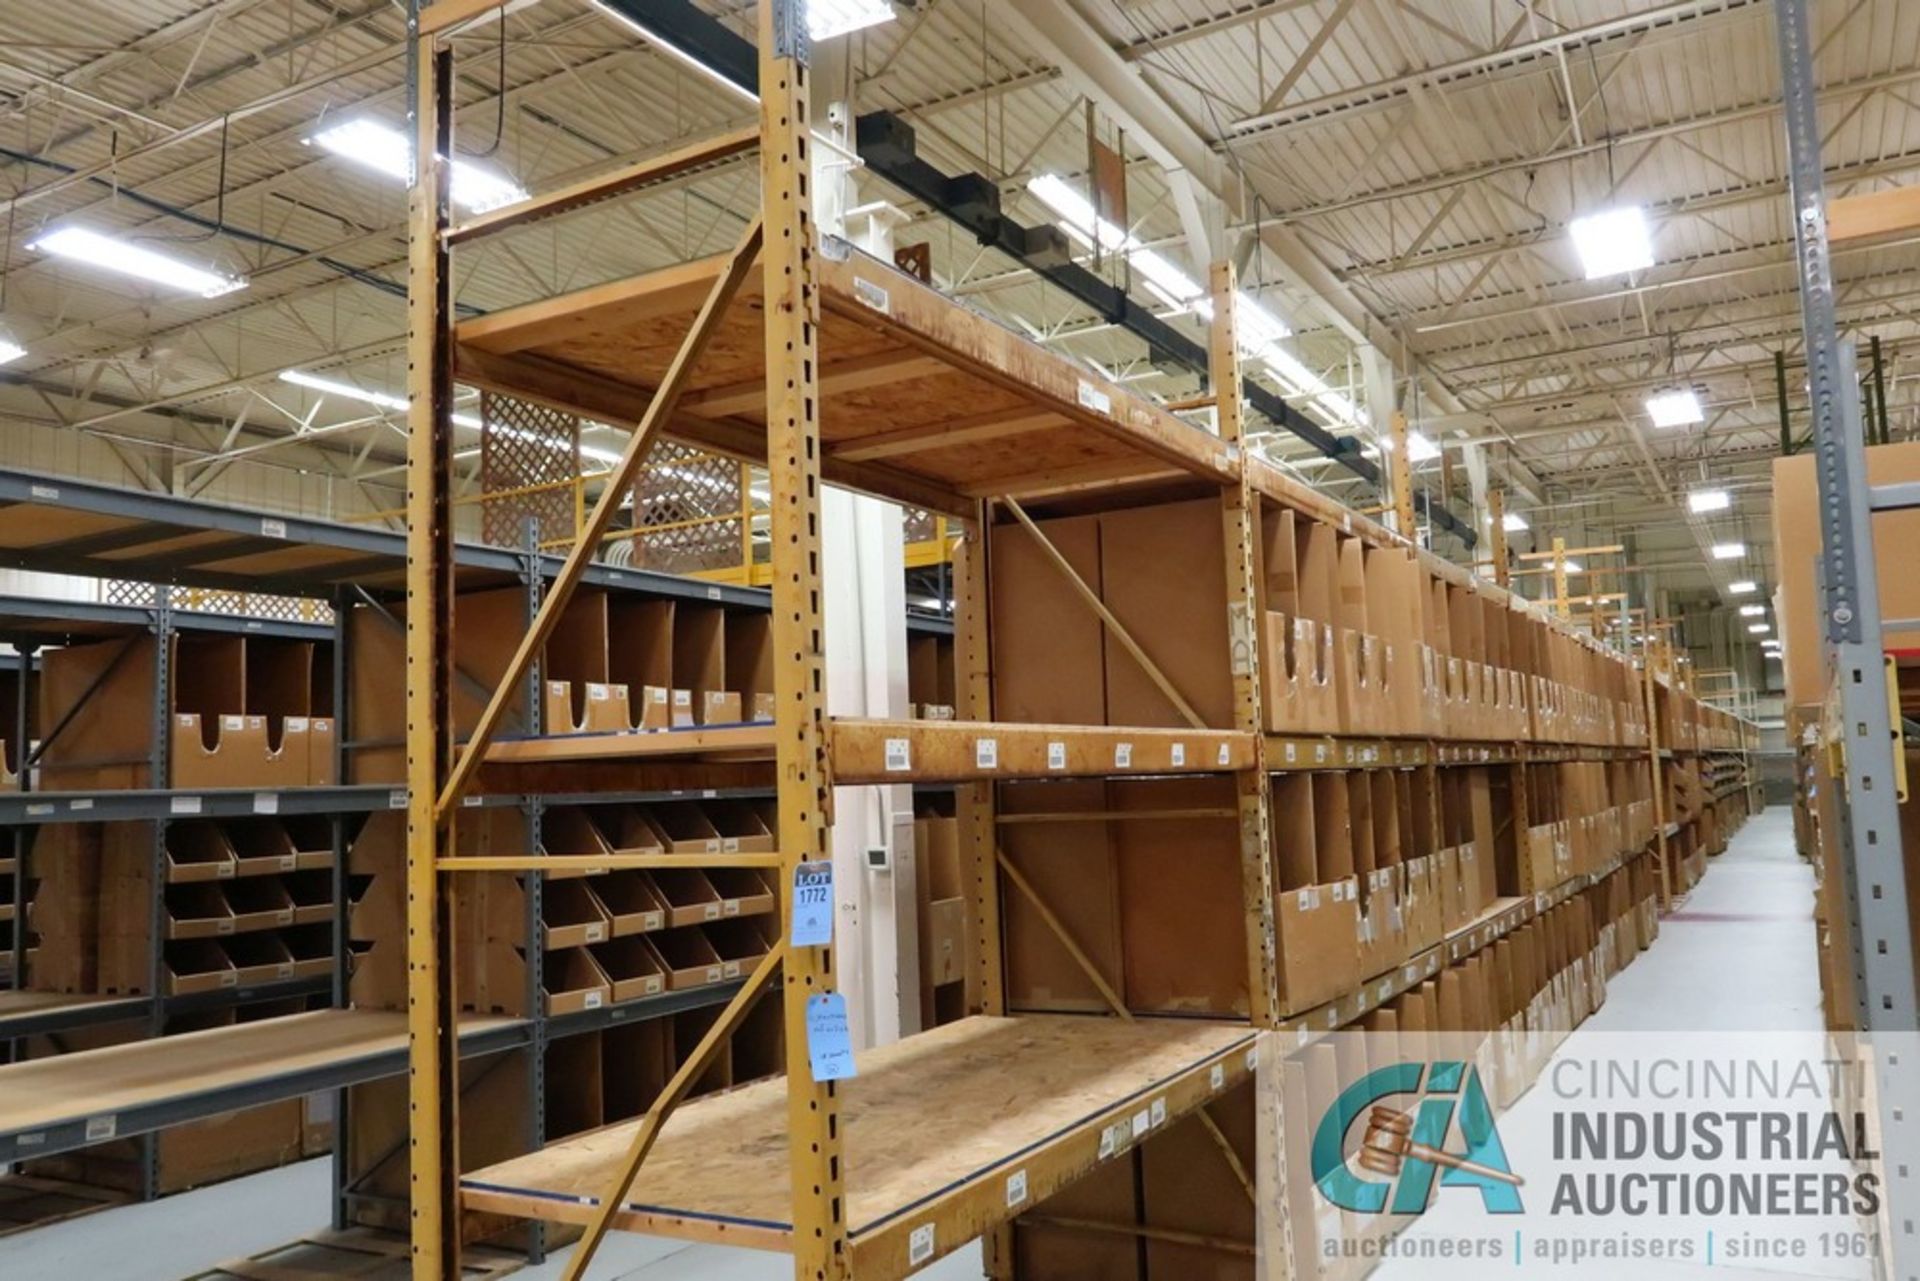 SECTIONS 44" X 100" X 12' PALLET RACK, (3) SHELVES PER SECTION, (36) BEAMS AND (18) SHEETS OF 4' X